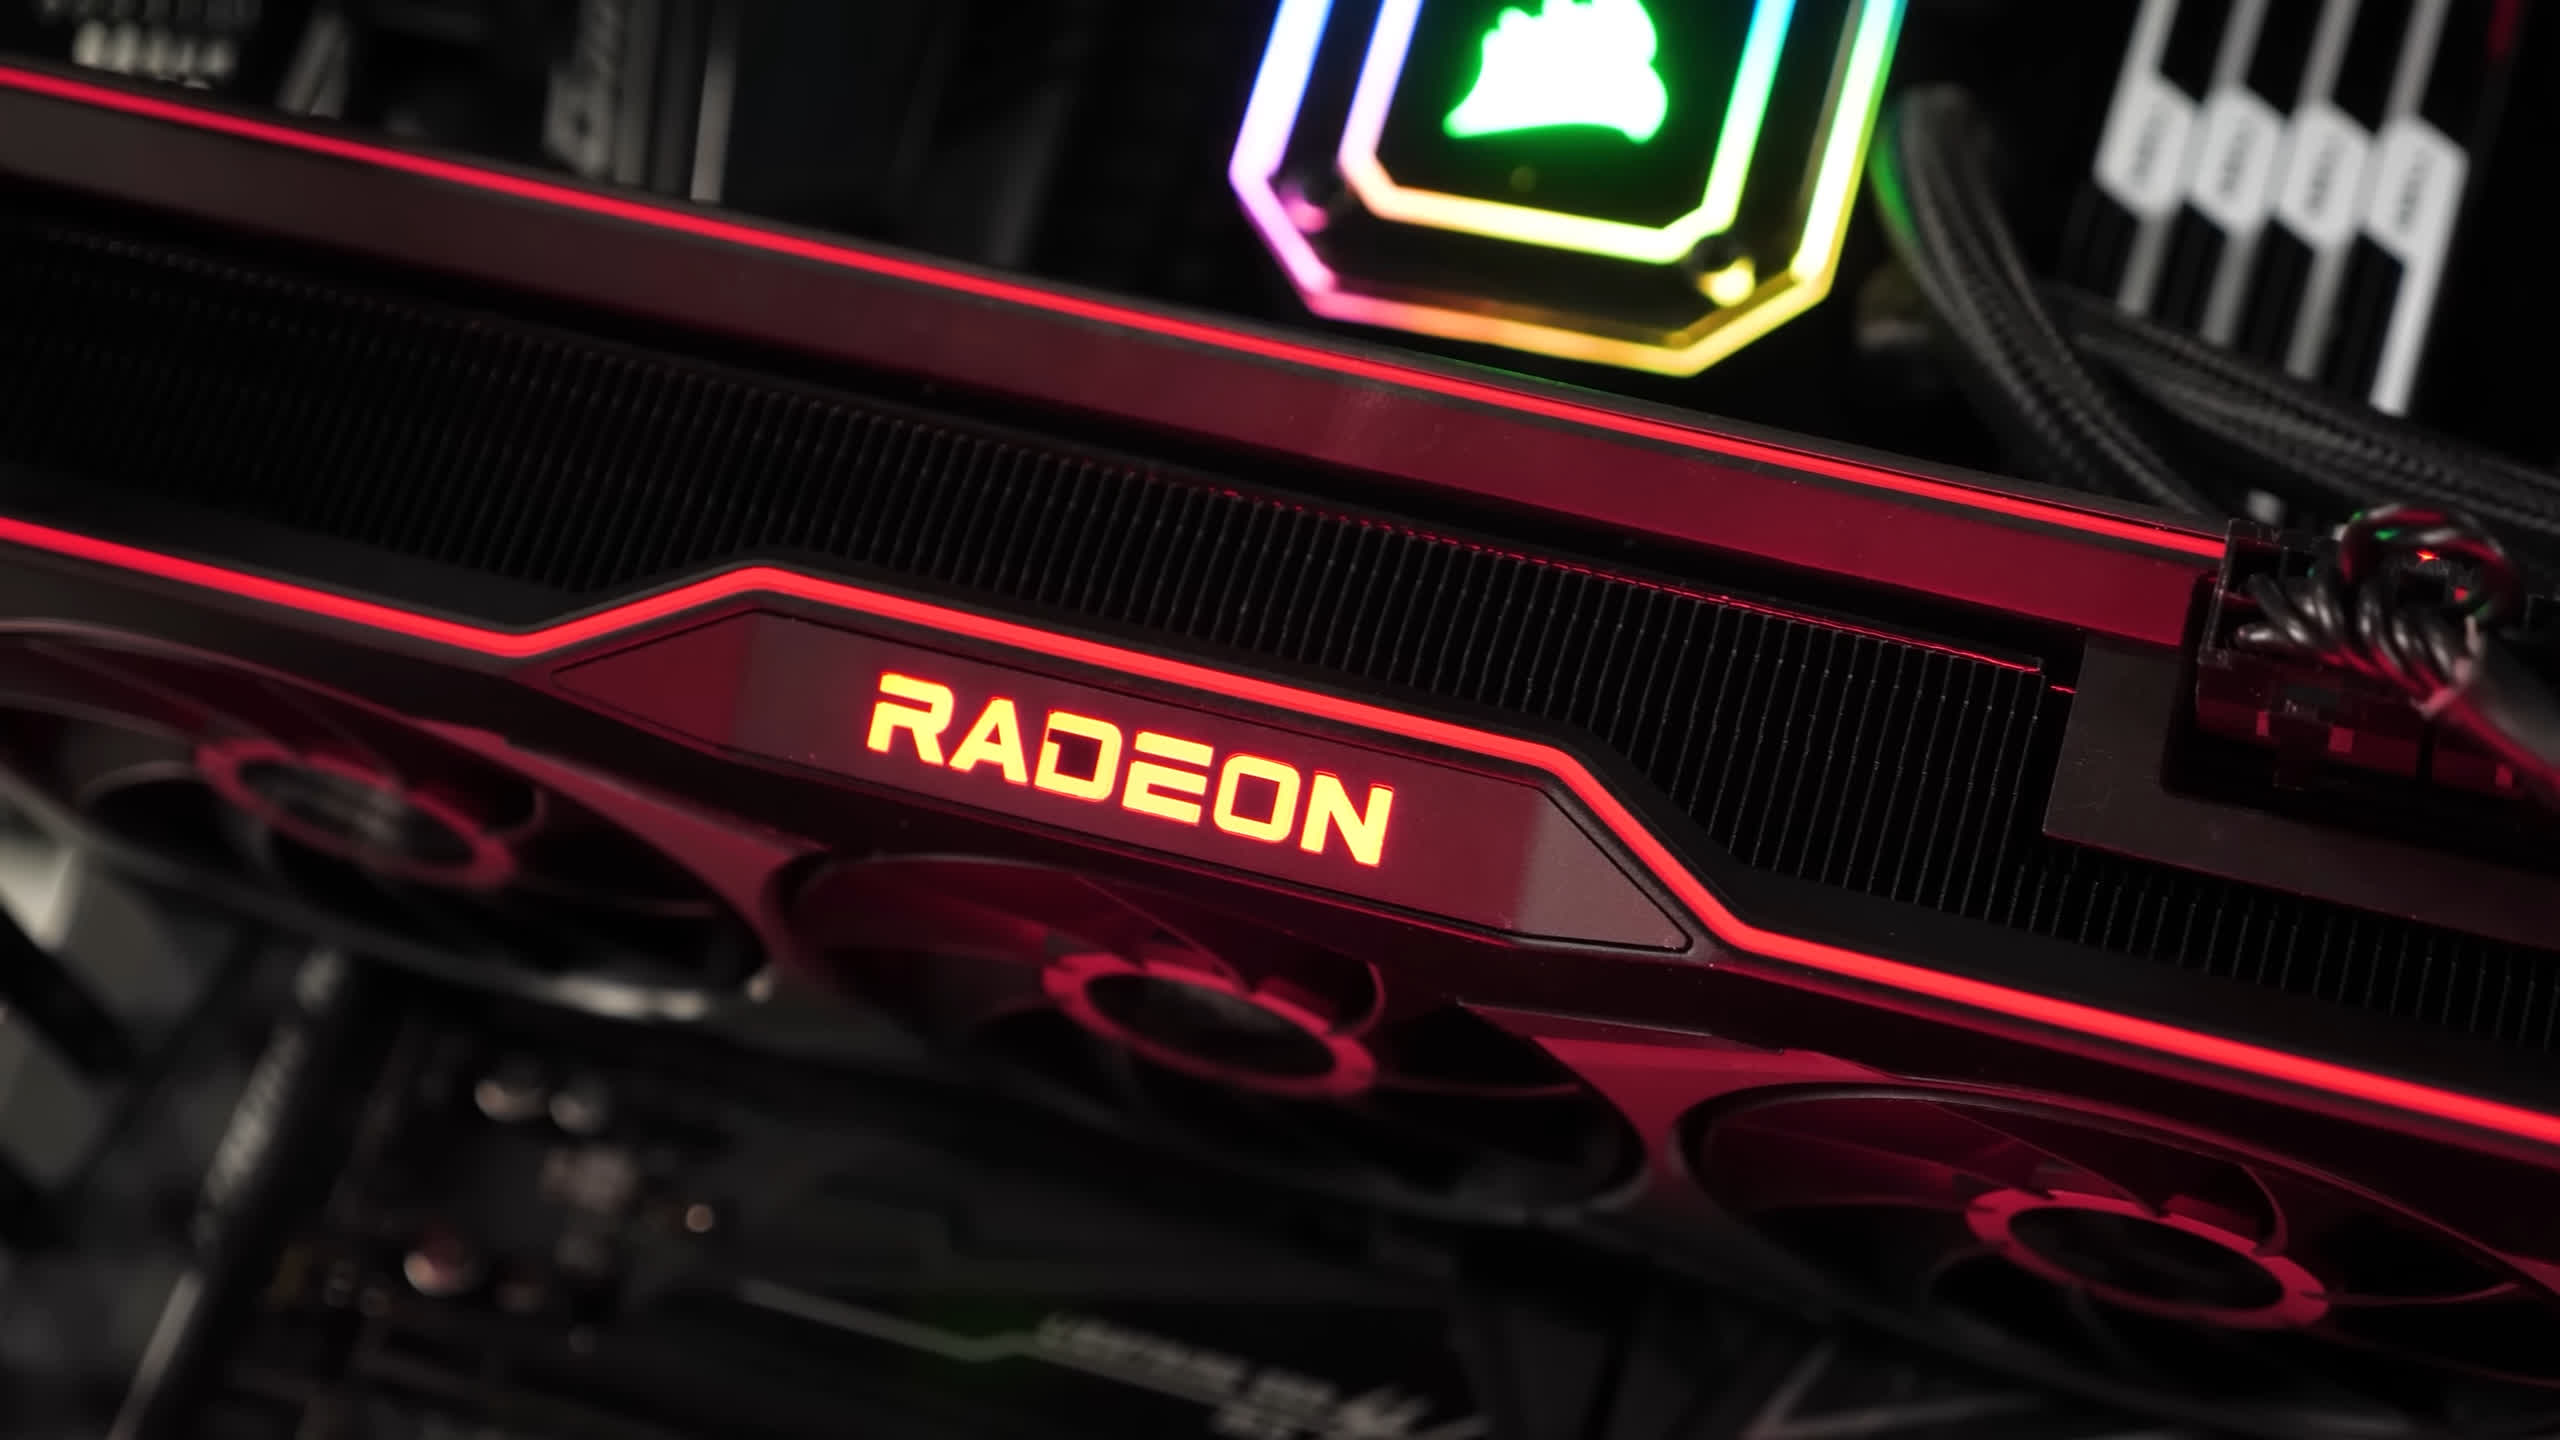 AMD's Radeon RX 7600 pictured ahead of official launch, listed on online marketplace